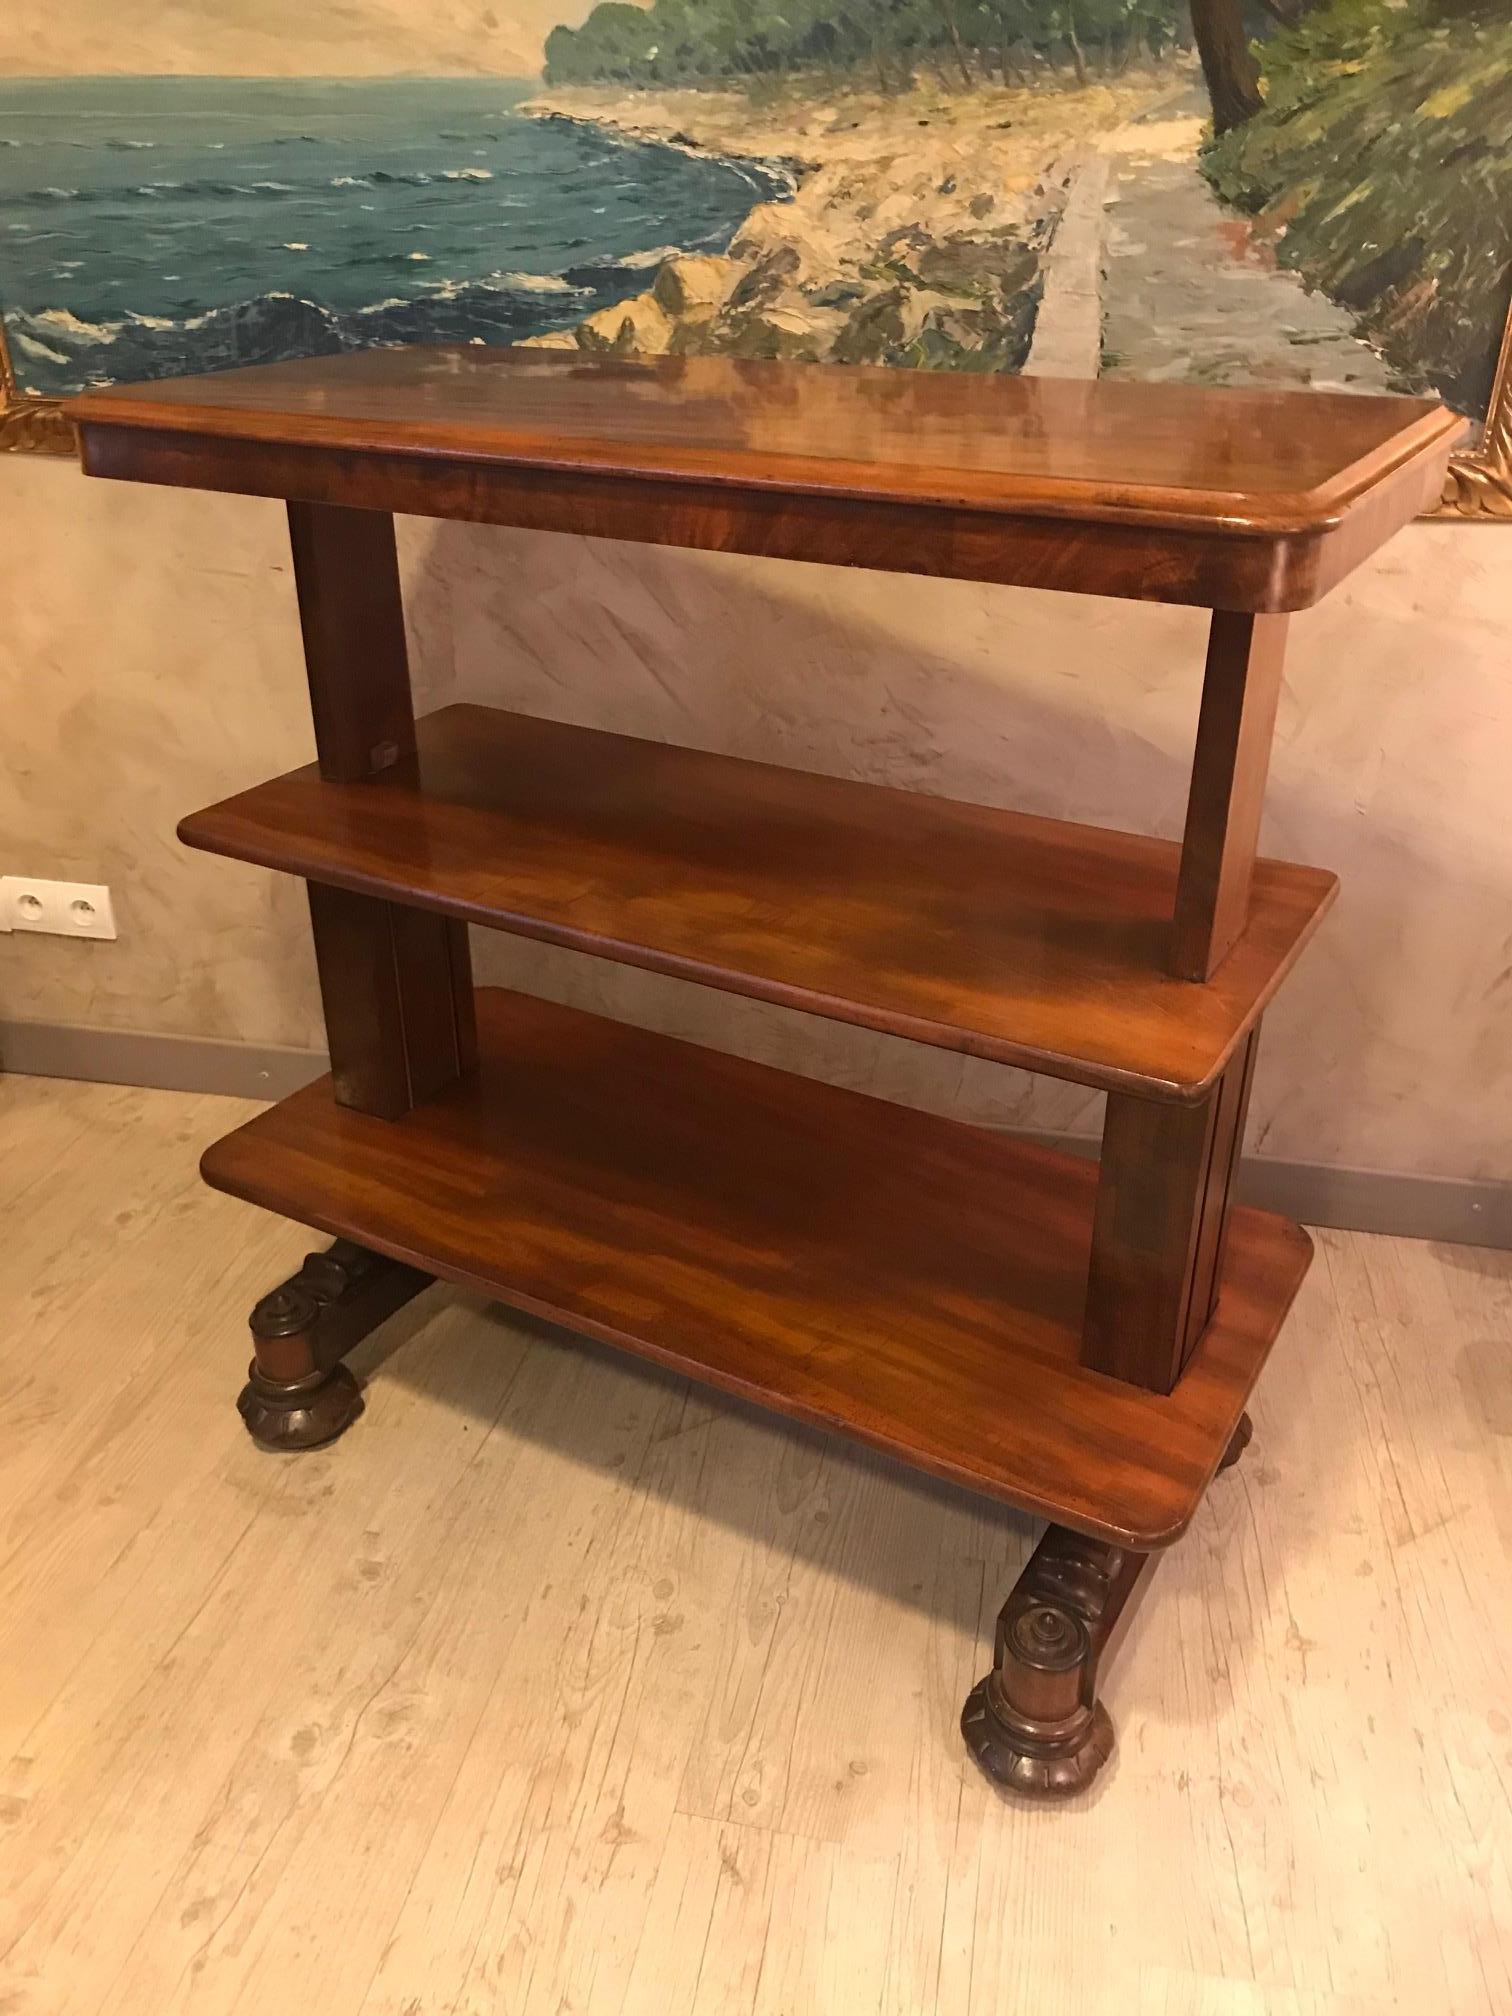 Very nice 19th century Mahogany English style console from the 1880s. 
Three shelves, the two last can be moved up and down thanks to a rope system. 
Very original and useful. Very nice style and good condition.